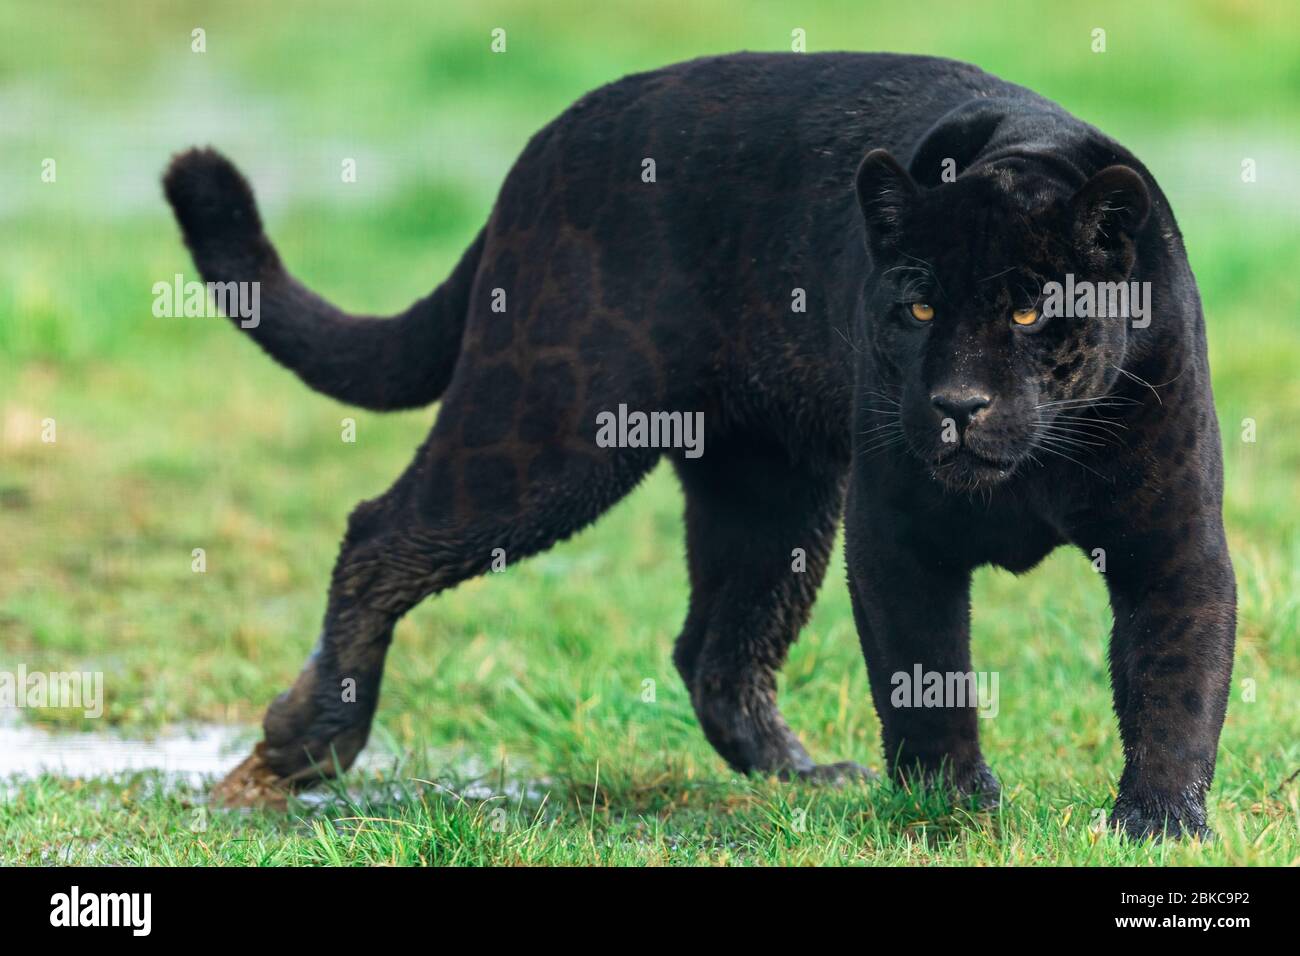 Portrait of a black jaguar in the forest Stock Photo